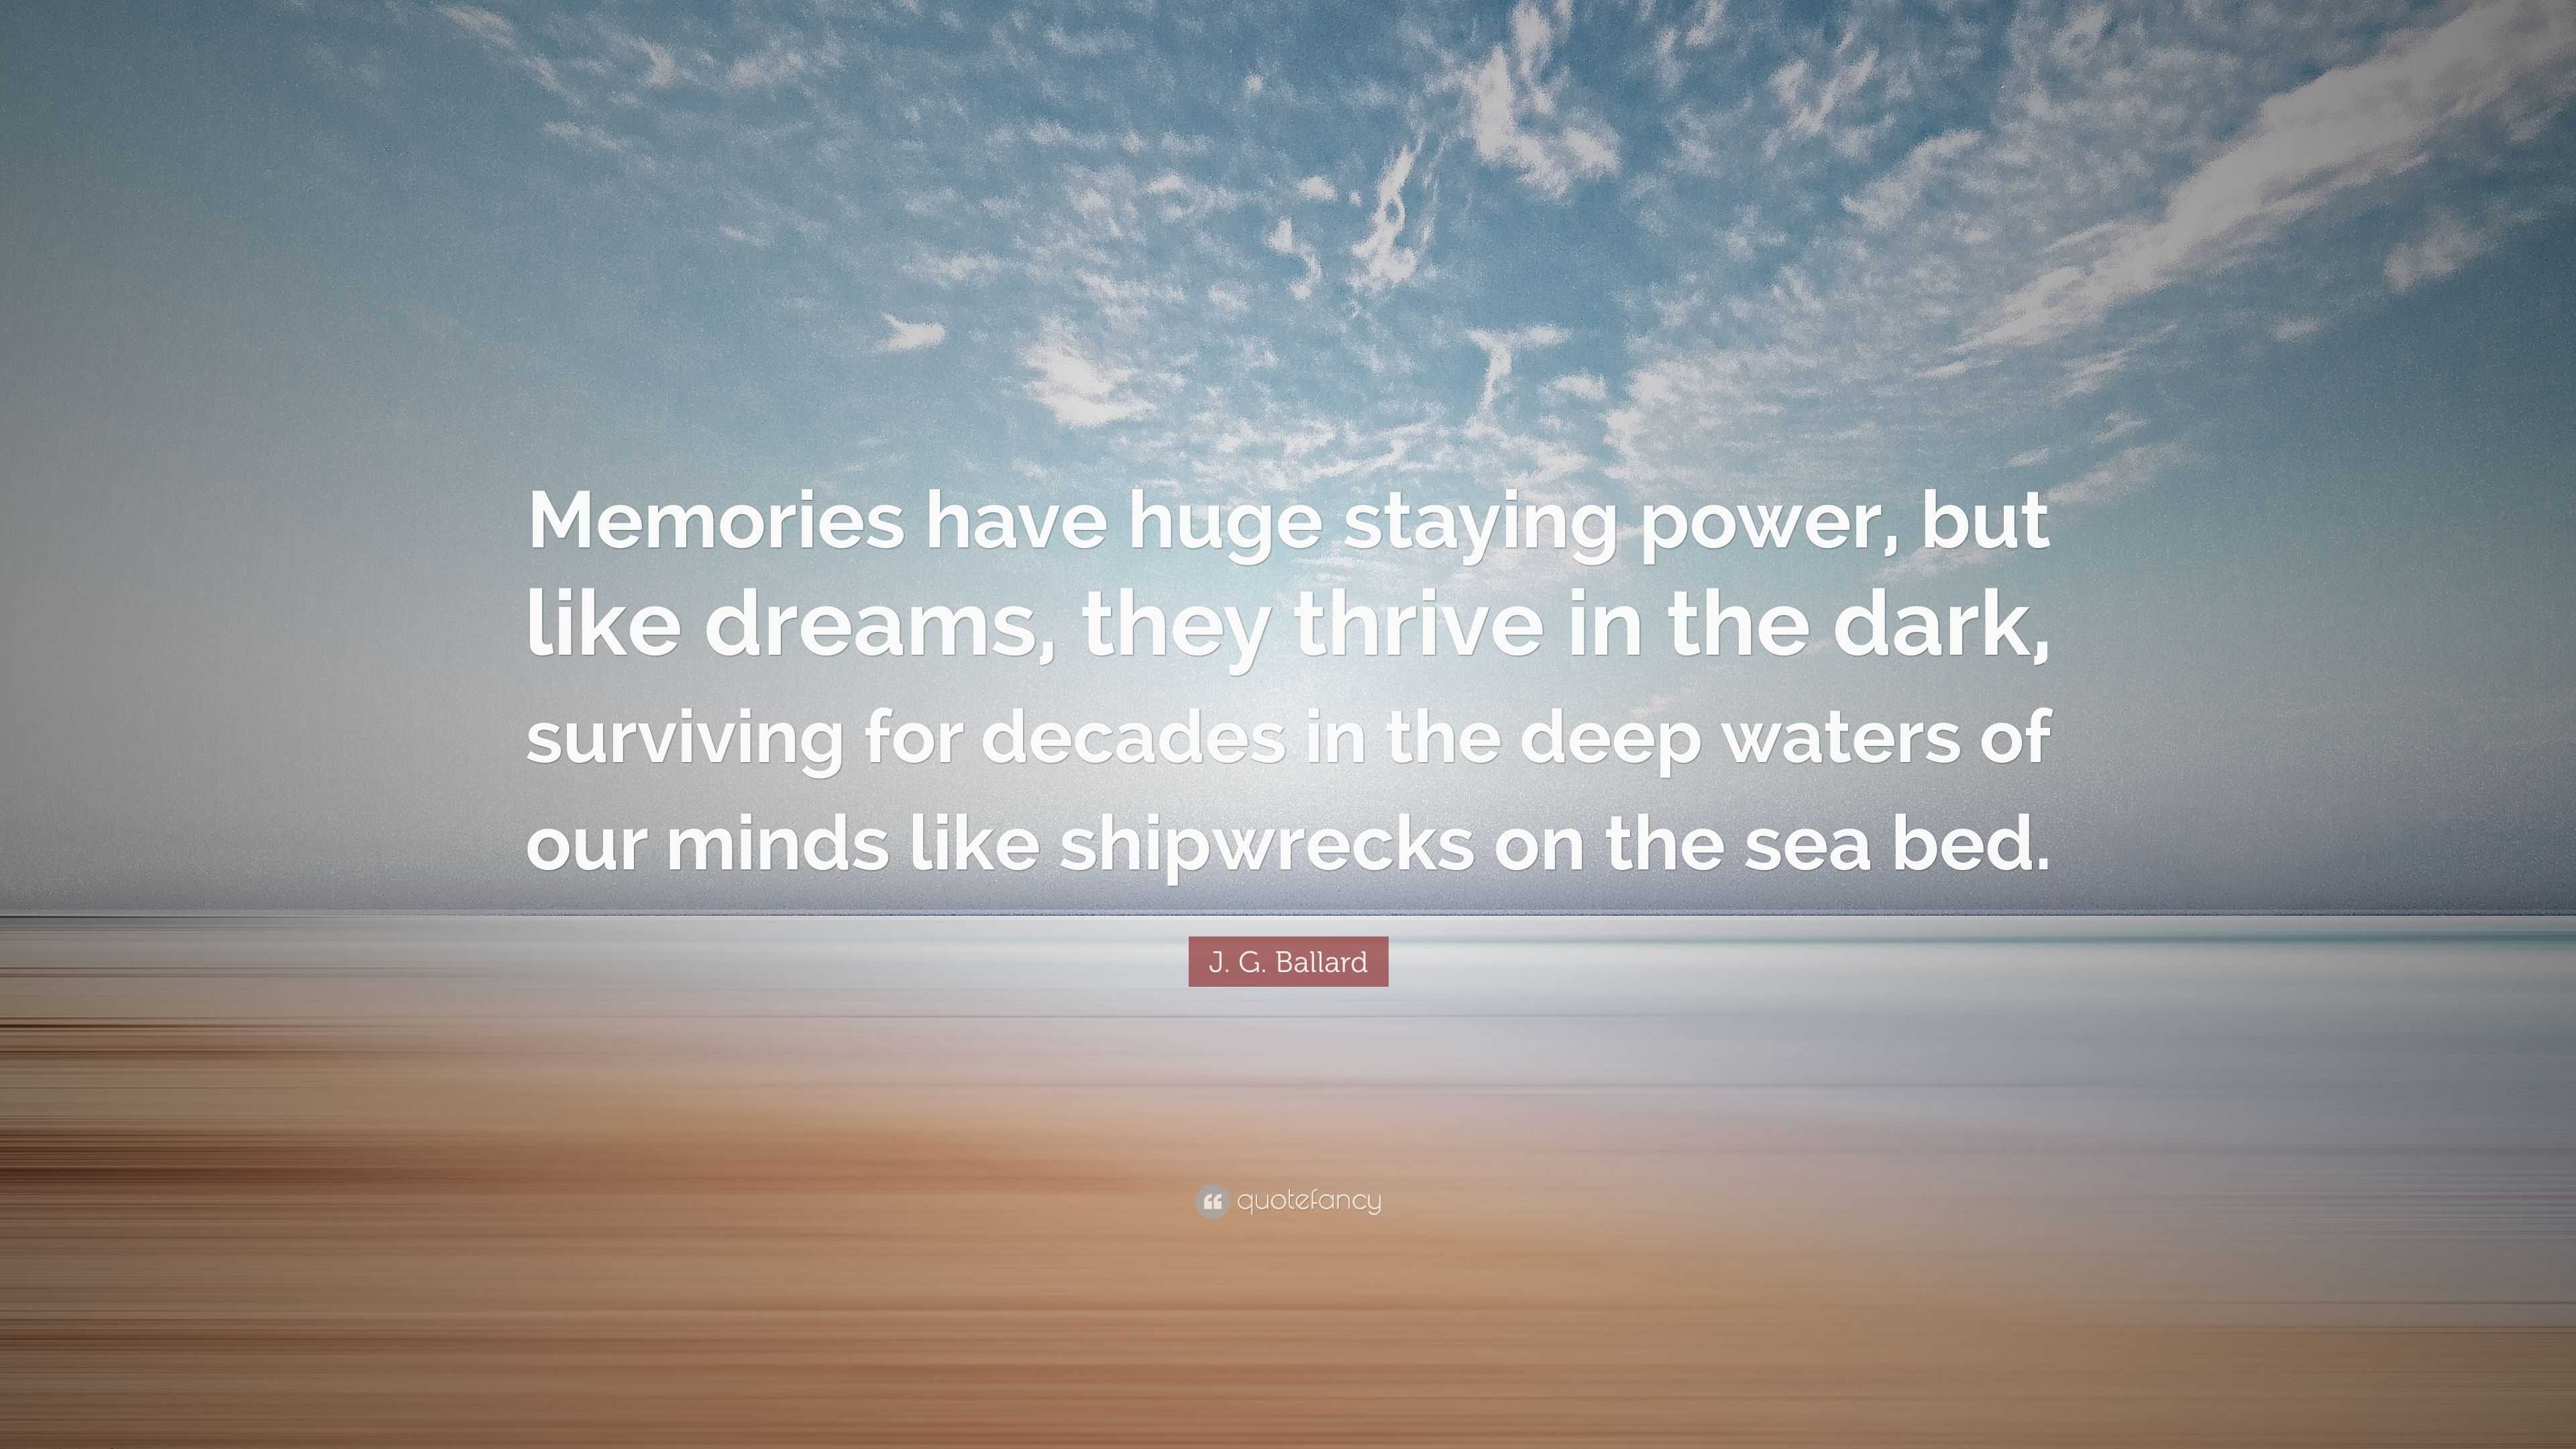 J. G. Ballard Quote: “Memories have huge staying power, but like dreams,  they thrive in the dark, surviving for decades in the deep waters of ”